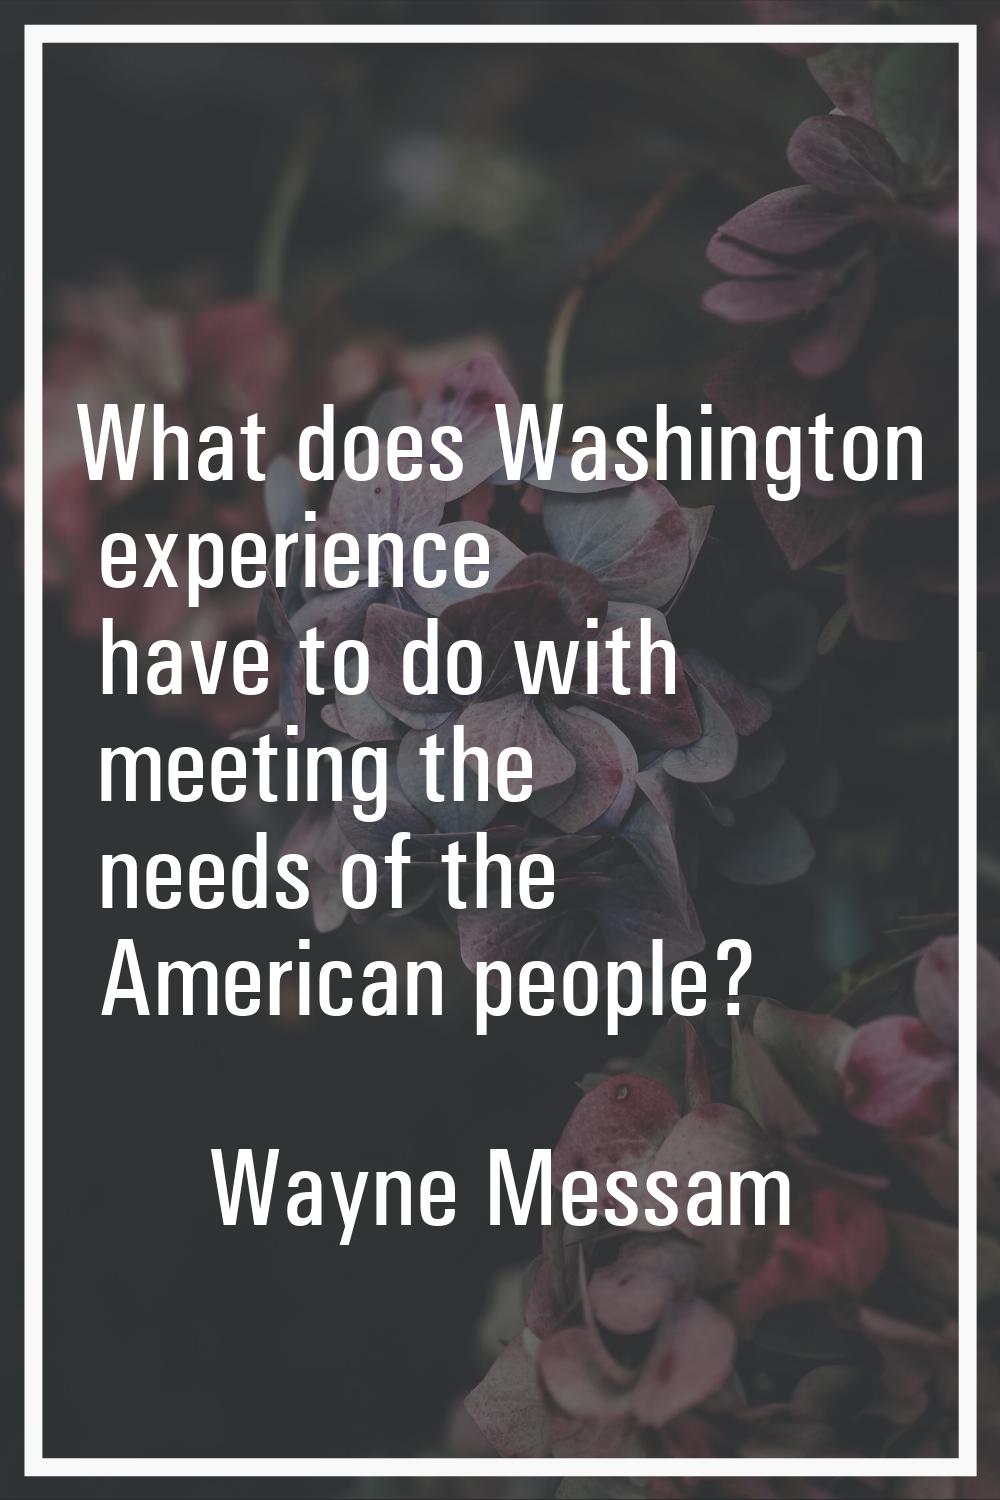 What does Washington experience have to do with meeting the needs of the American people?